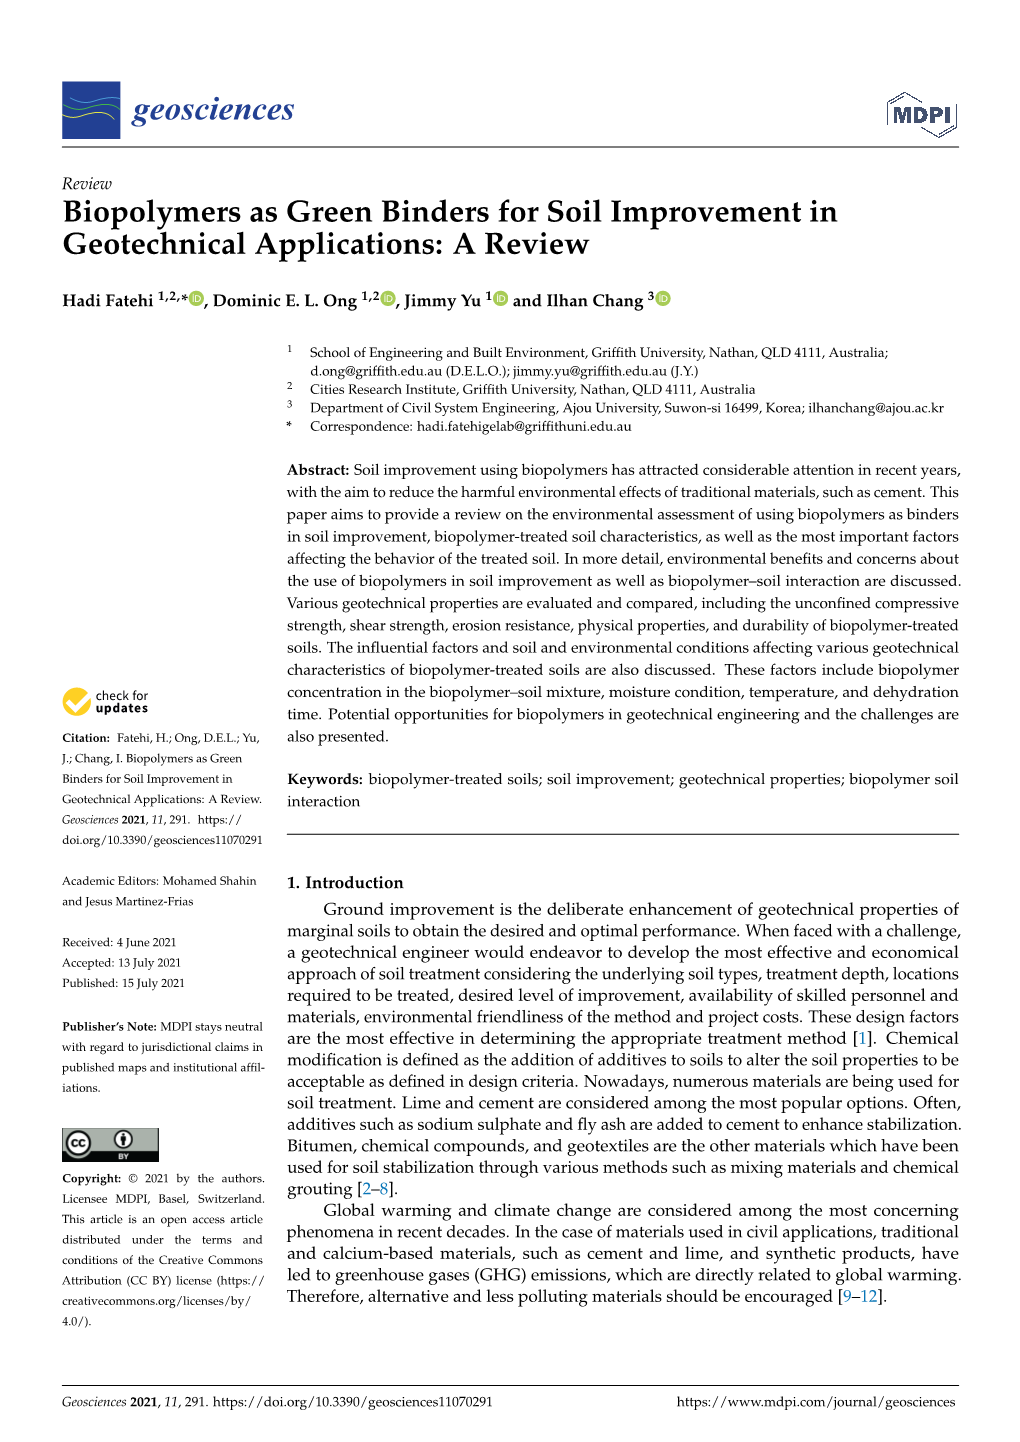 Biopolymers As Green Binders for Soil Improvement in Geotechnical Applications: a Review